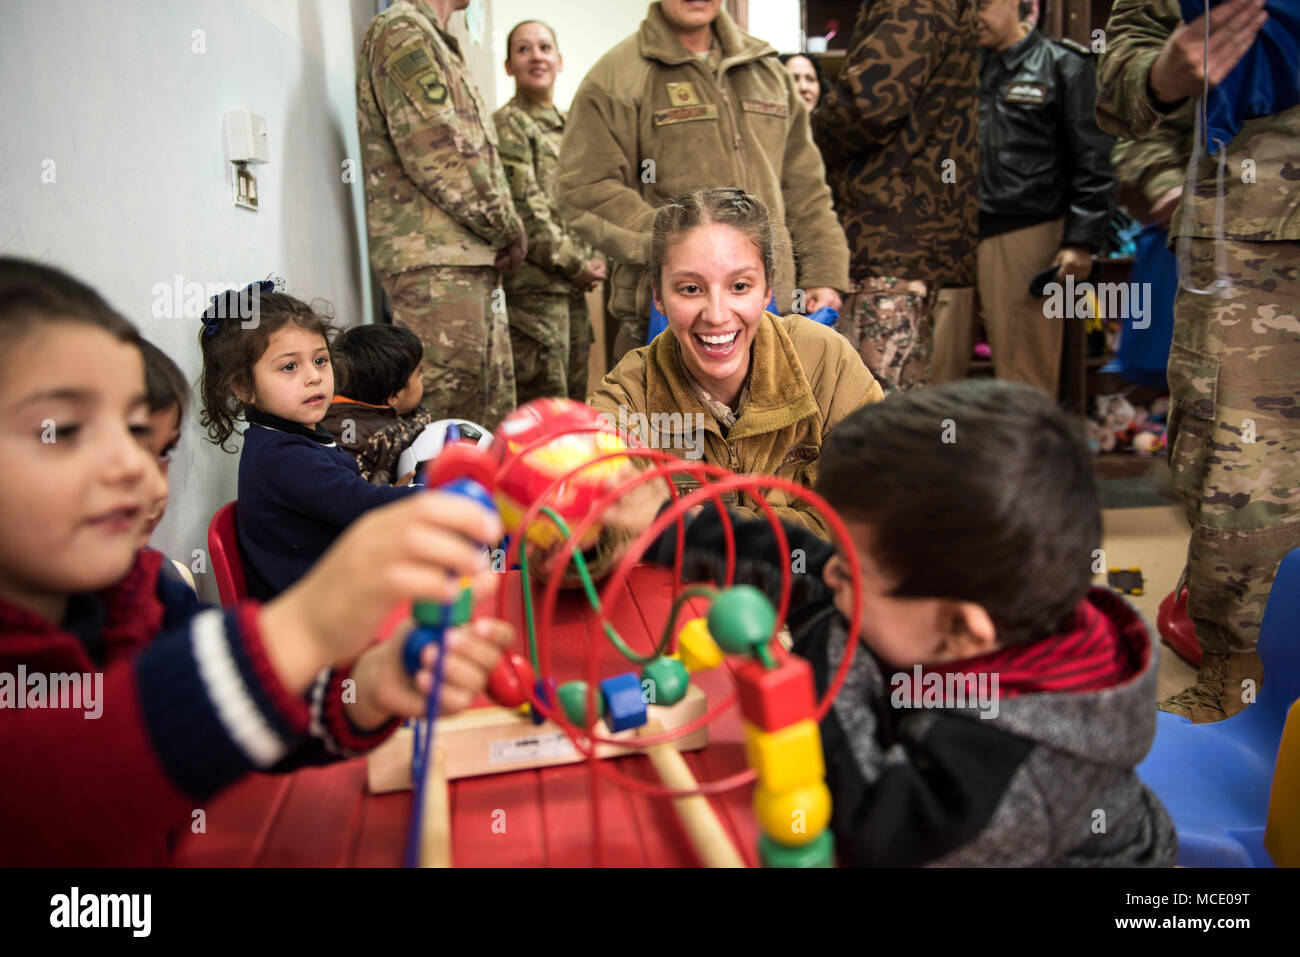 Senior Airman Maria Lopez, assigned to the 332d Expeditionary Security Forces Squadron, plays with children during a donation drop-off February 26, 2018, at an undisclosed location. Service members gathered and delivered supplies in their spare time as they work towards Operation Inherent Resolve objectives. (U.S. Air Force photo by Staff Sgt. Joshua Kleinholz) Stock Photo